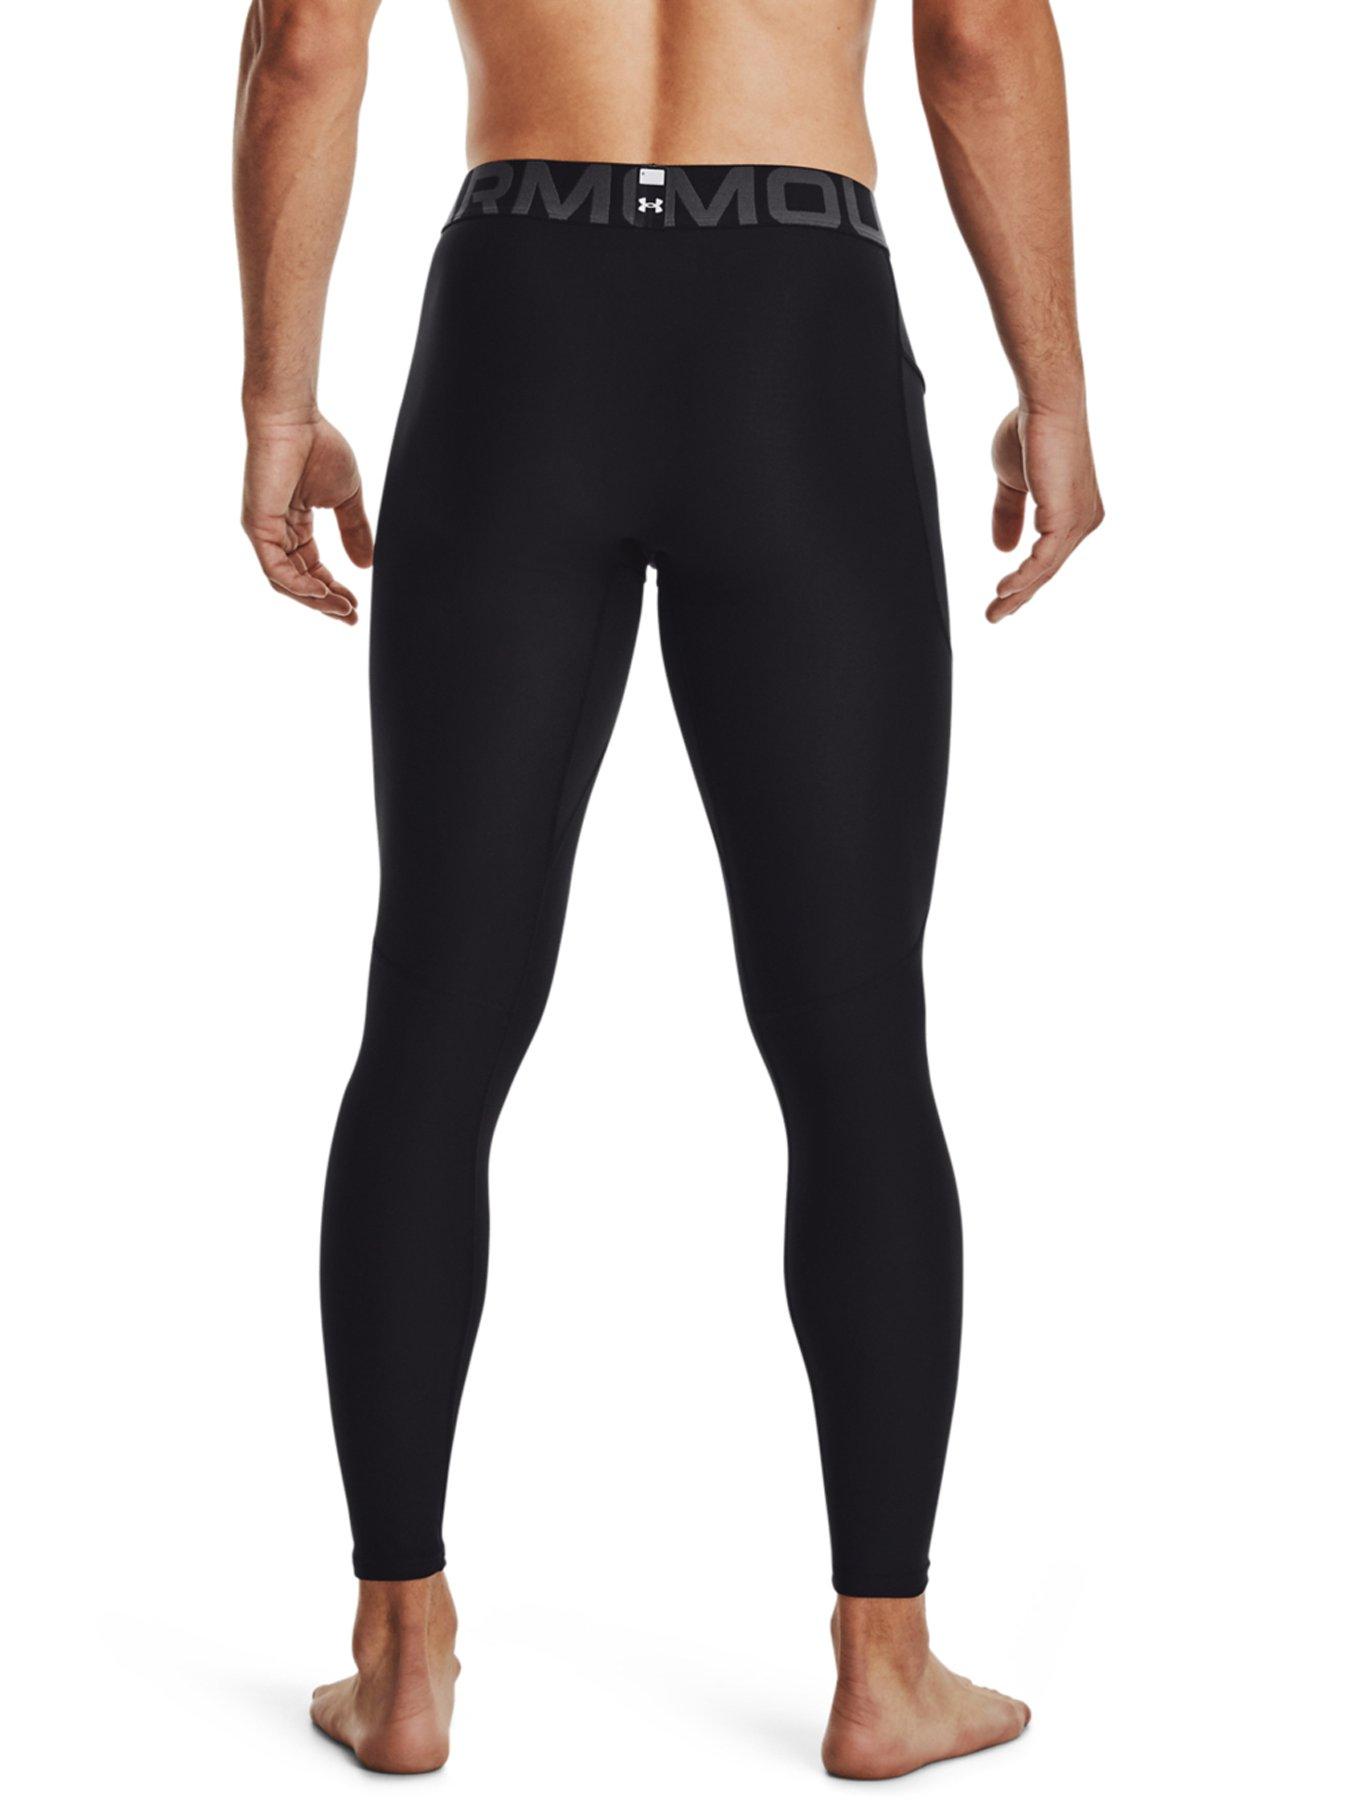 UNDER ARMOUR Heat Gear Armour Tights - Black/White